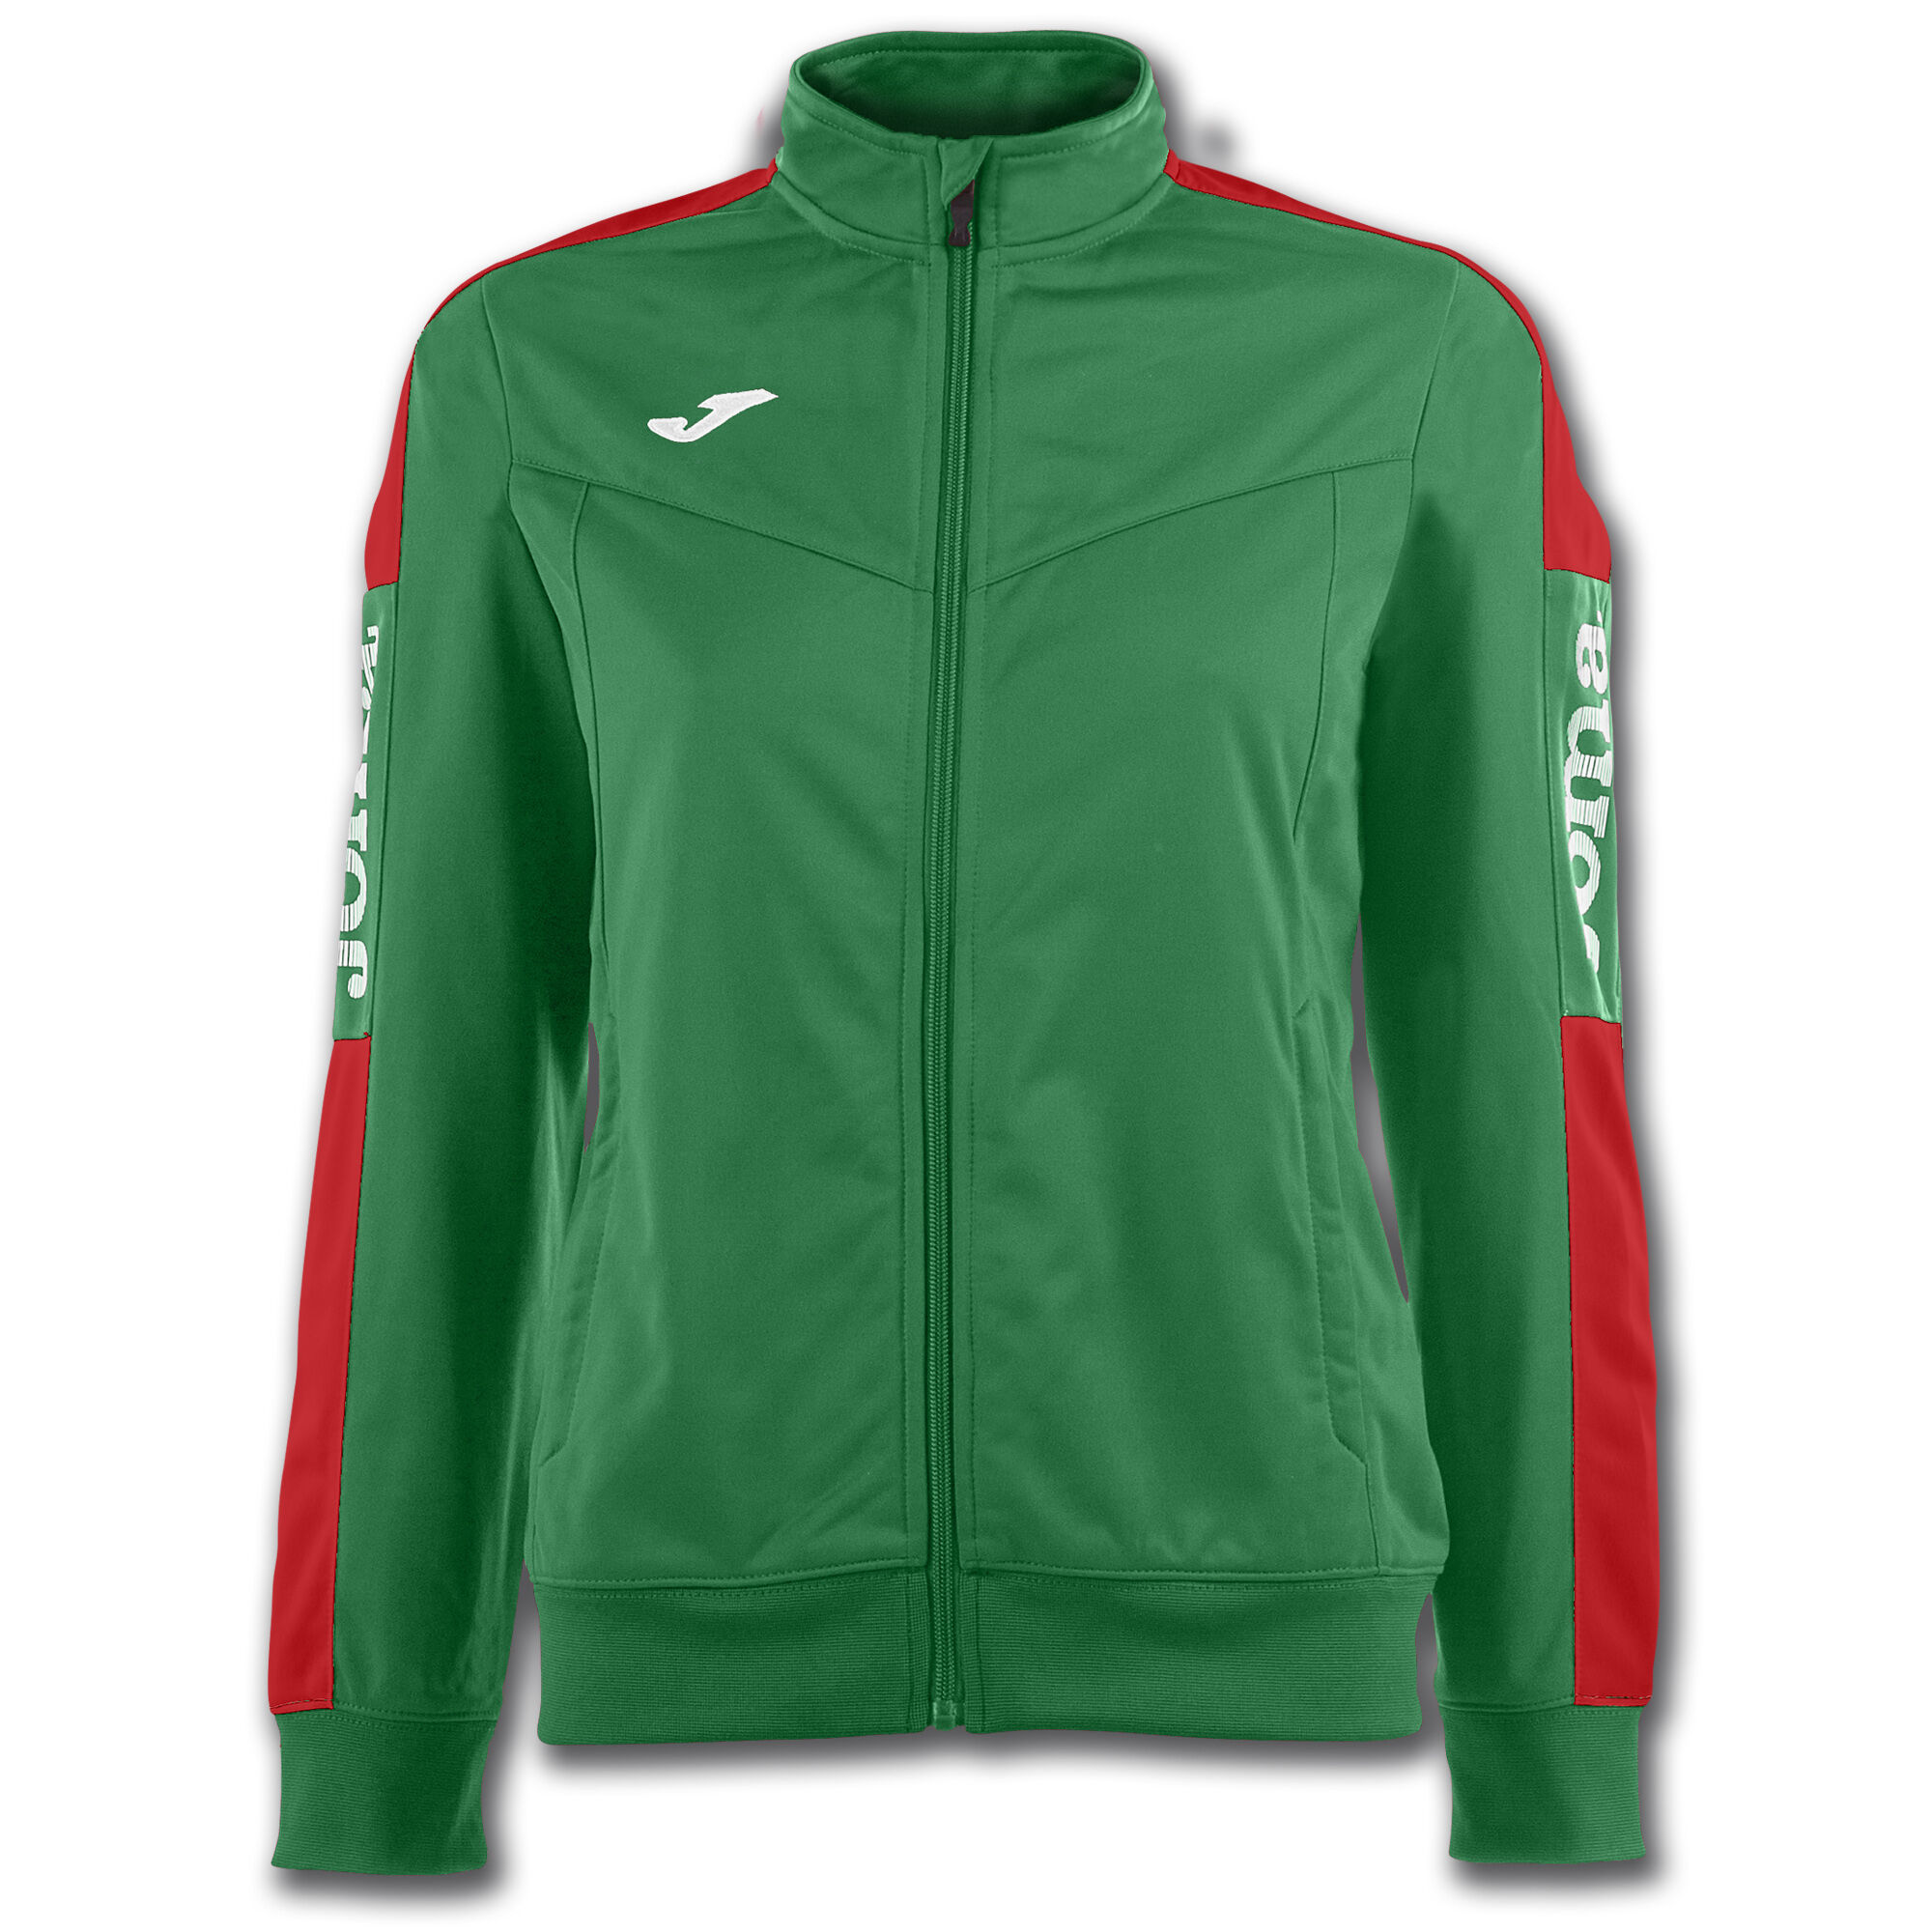 Giacca donna Championship IV verde rosso